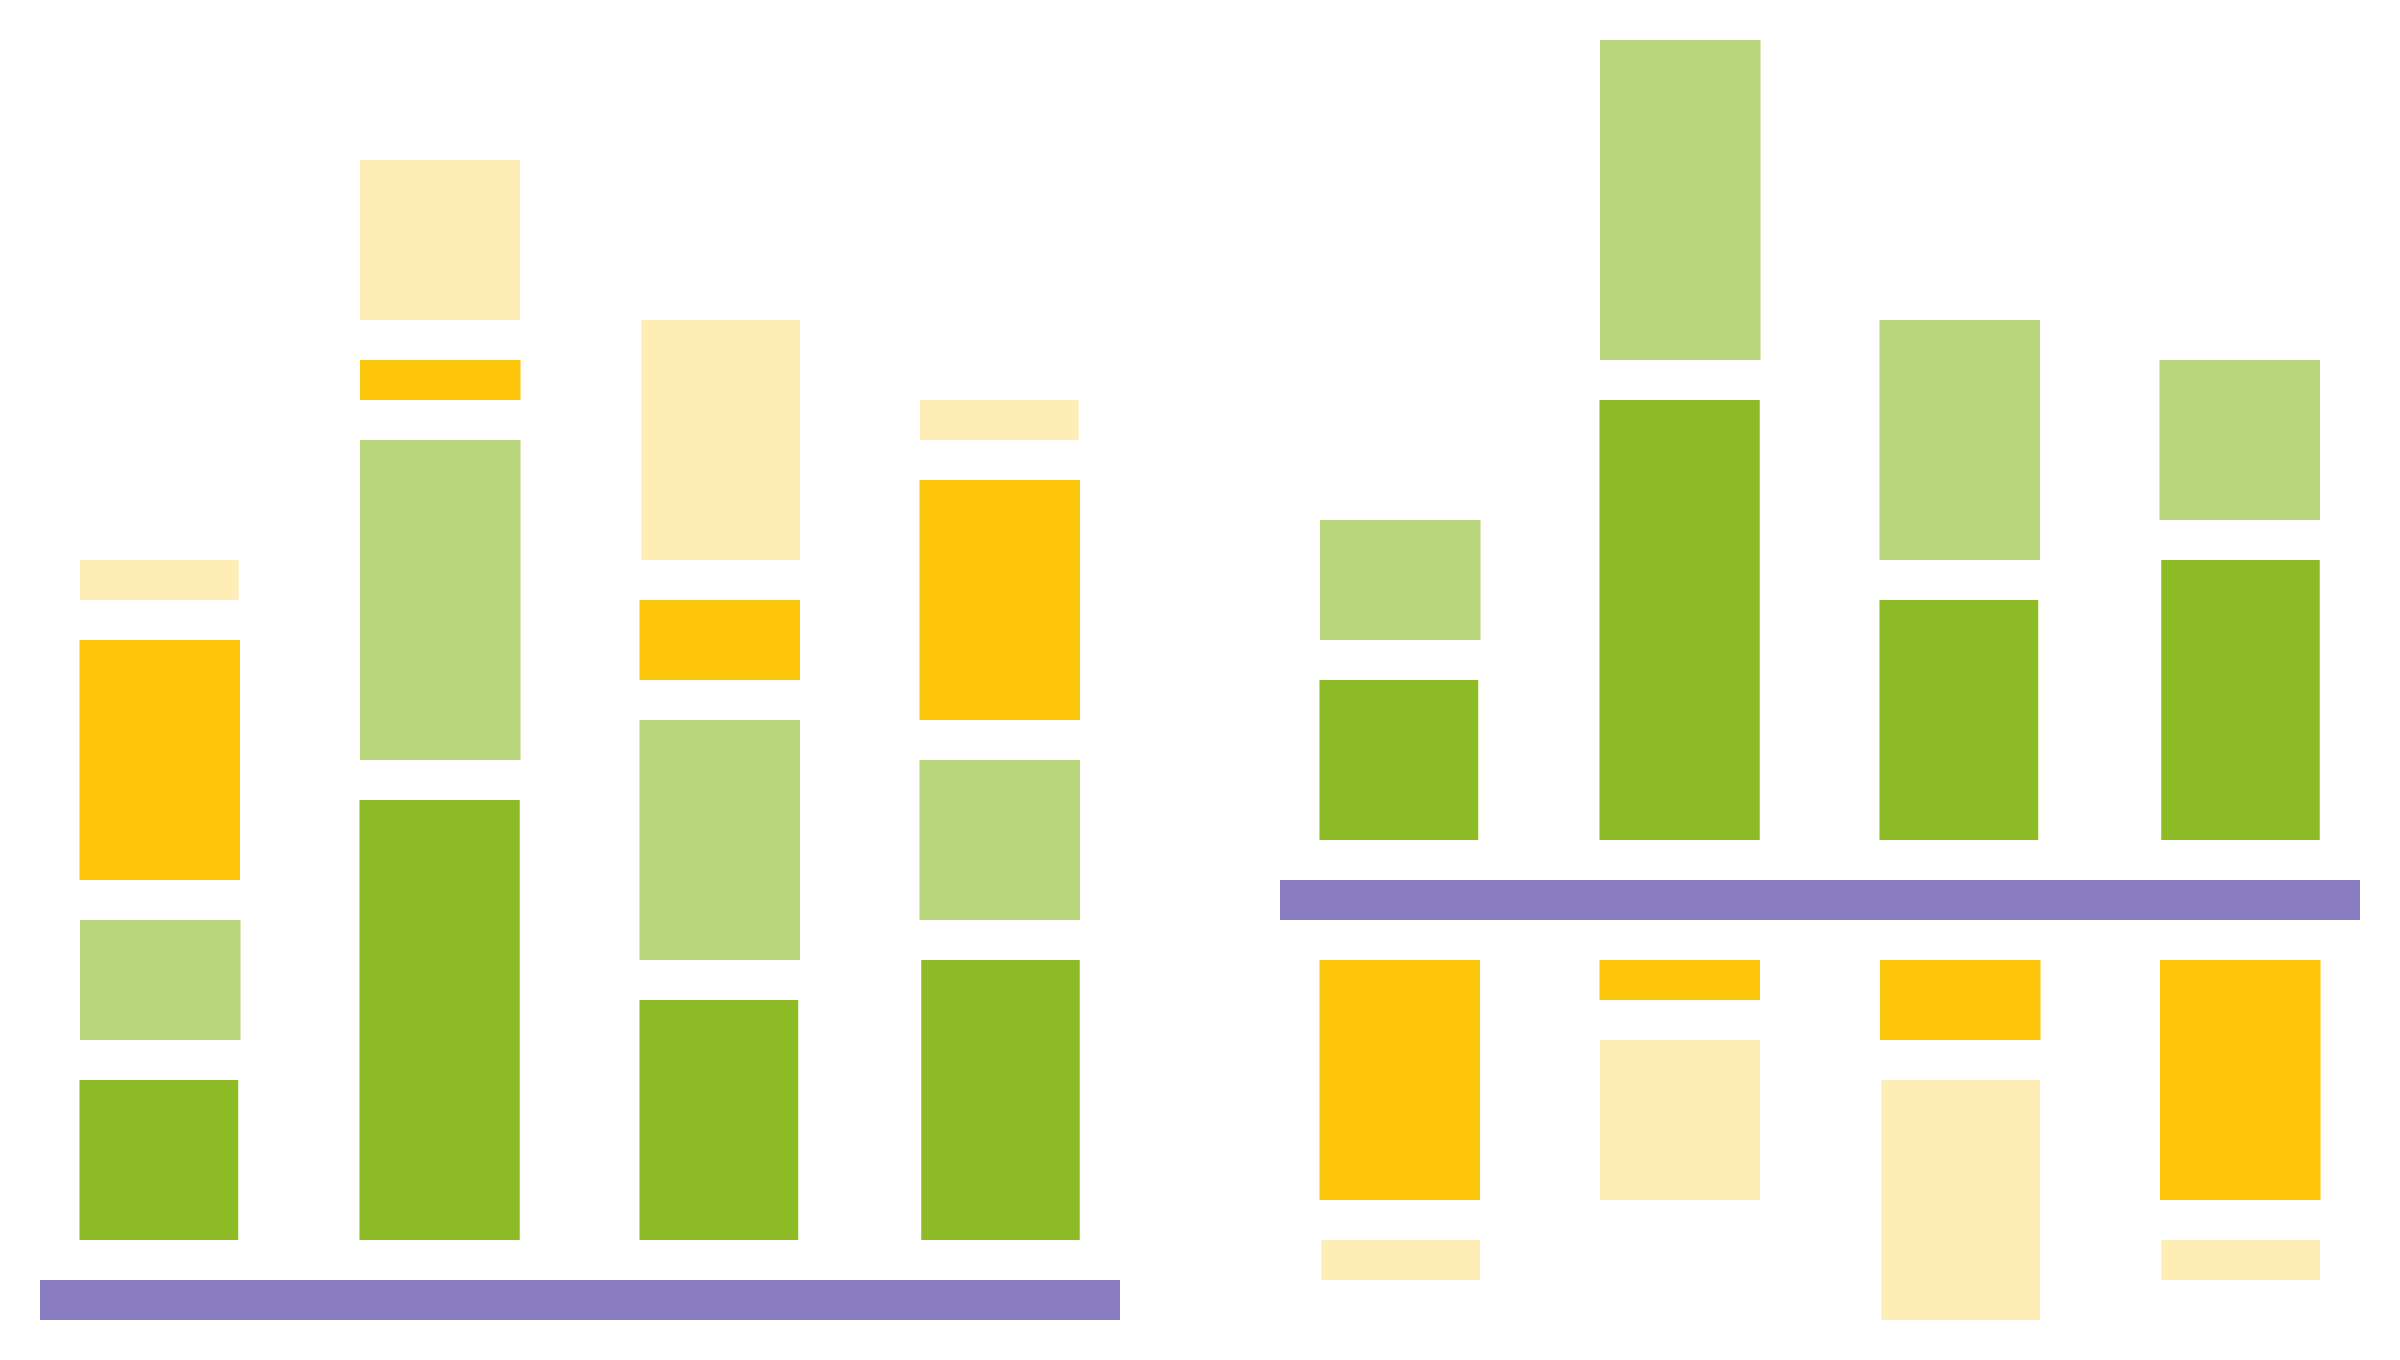 a basic visual showing two charts, one with and one without the negative values in a stacked bar chart.